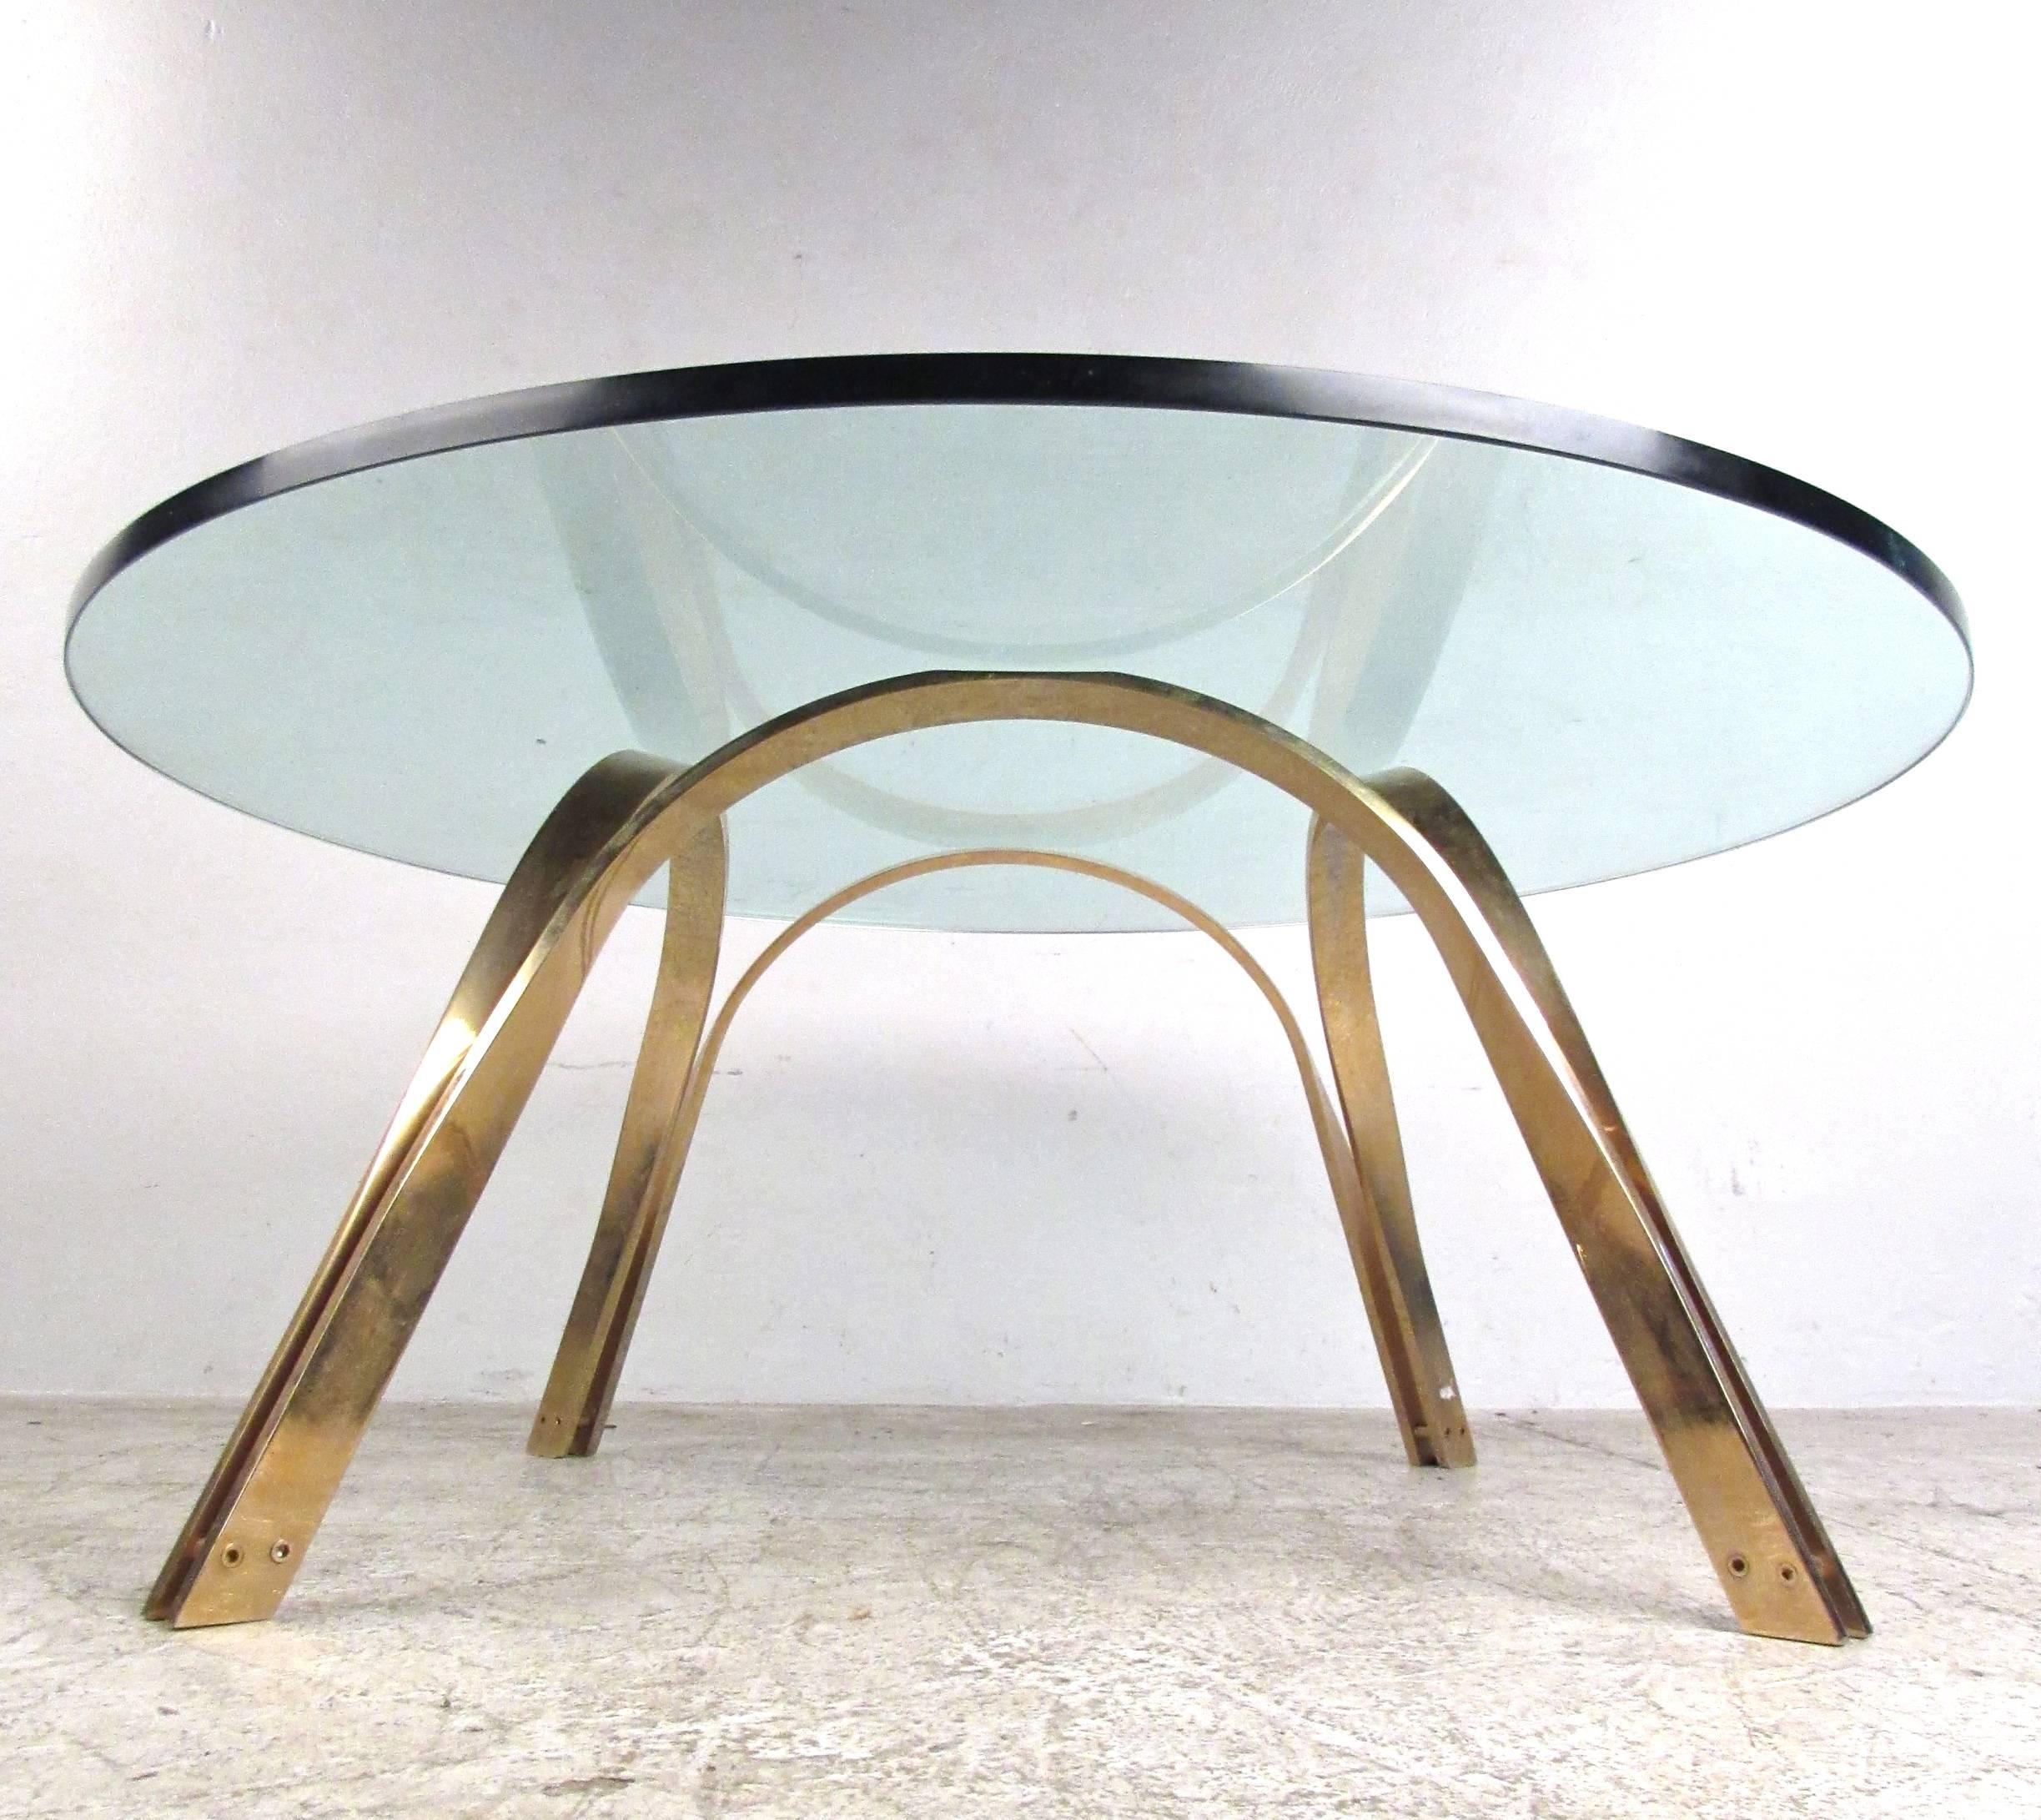 American Mid-Century Modern Brass Coffee Table After Roger Sprunger for Dunbar